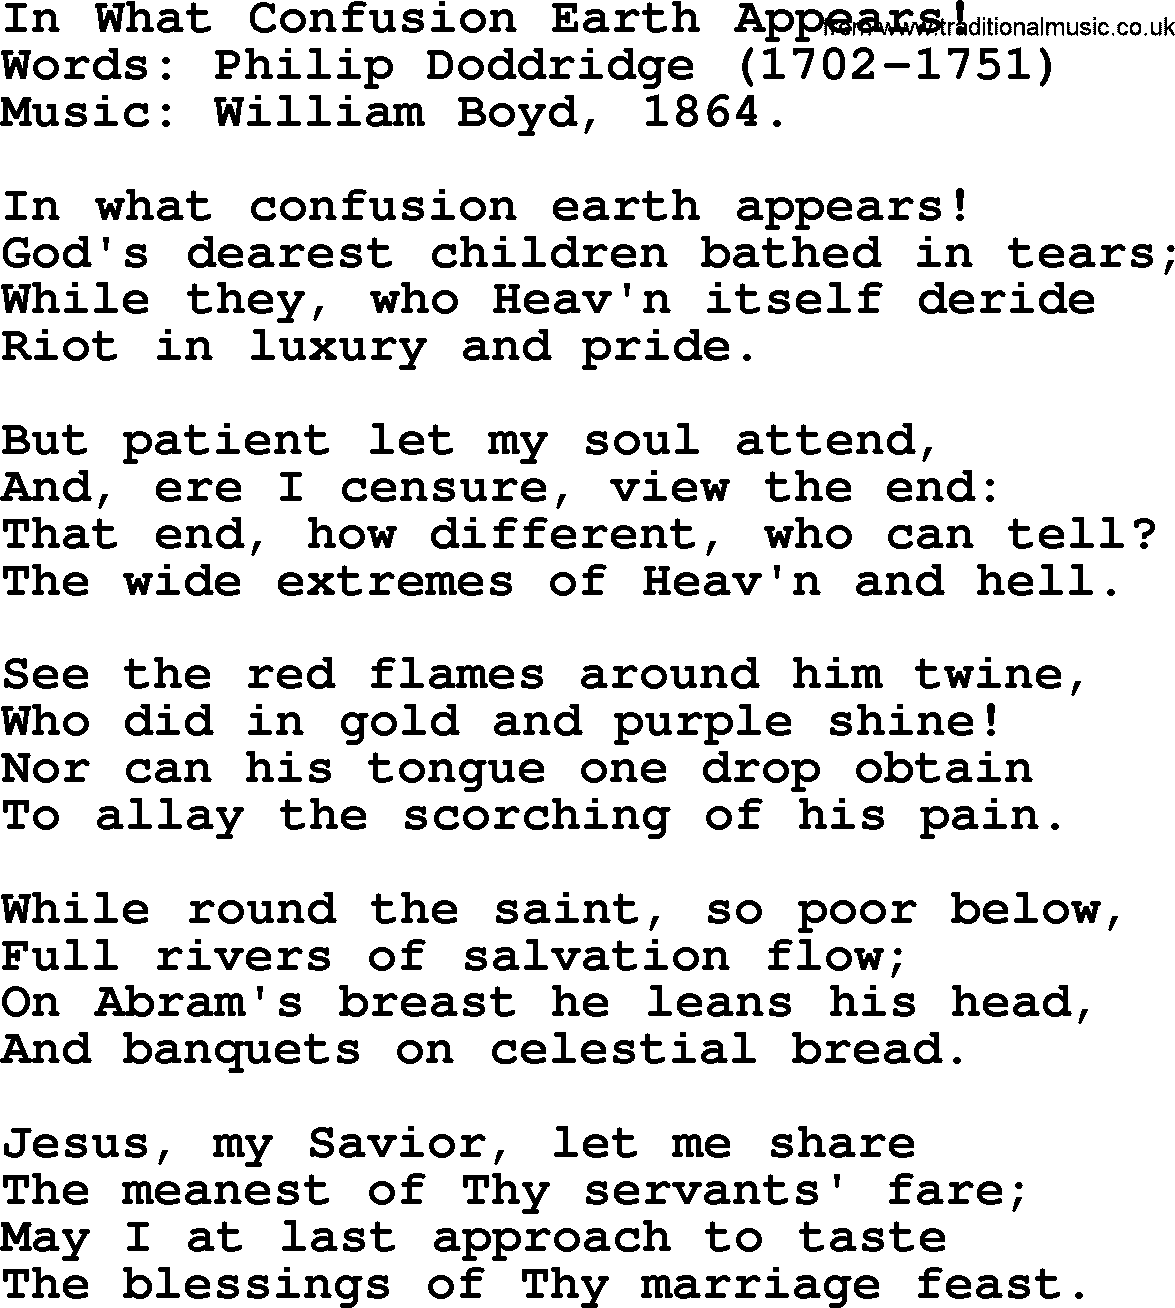 Songs and Hymns about Heaven: In What Confusion Earth Appears! lyrics with PDF